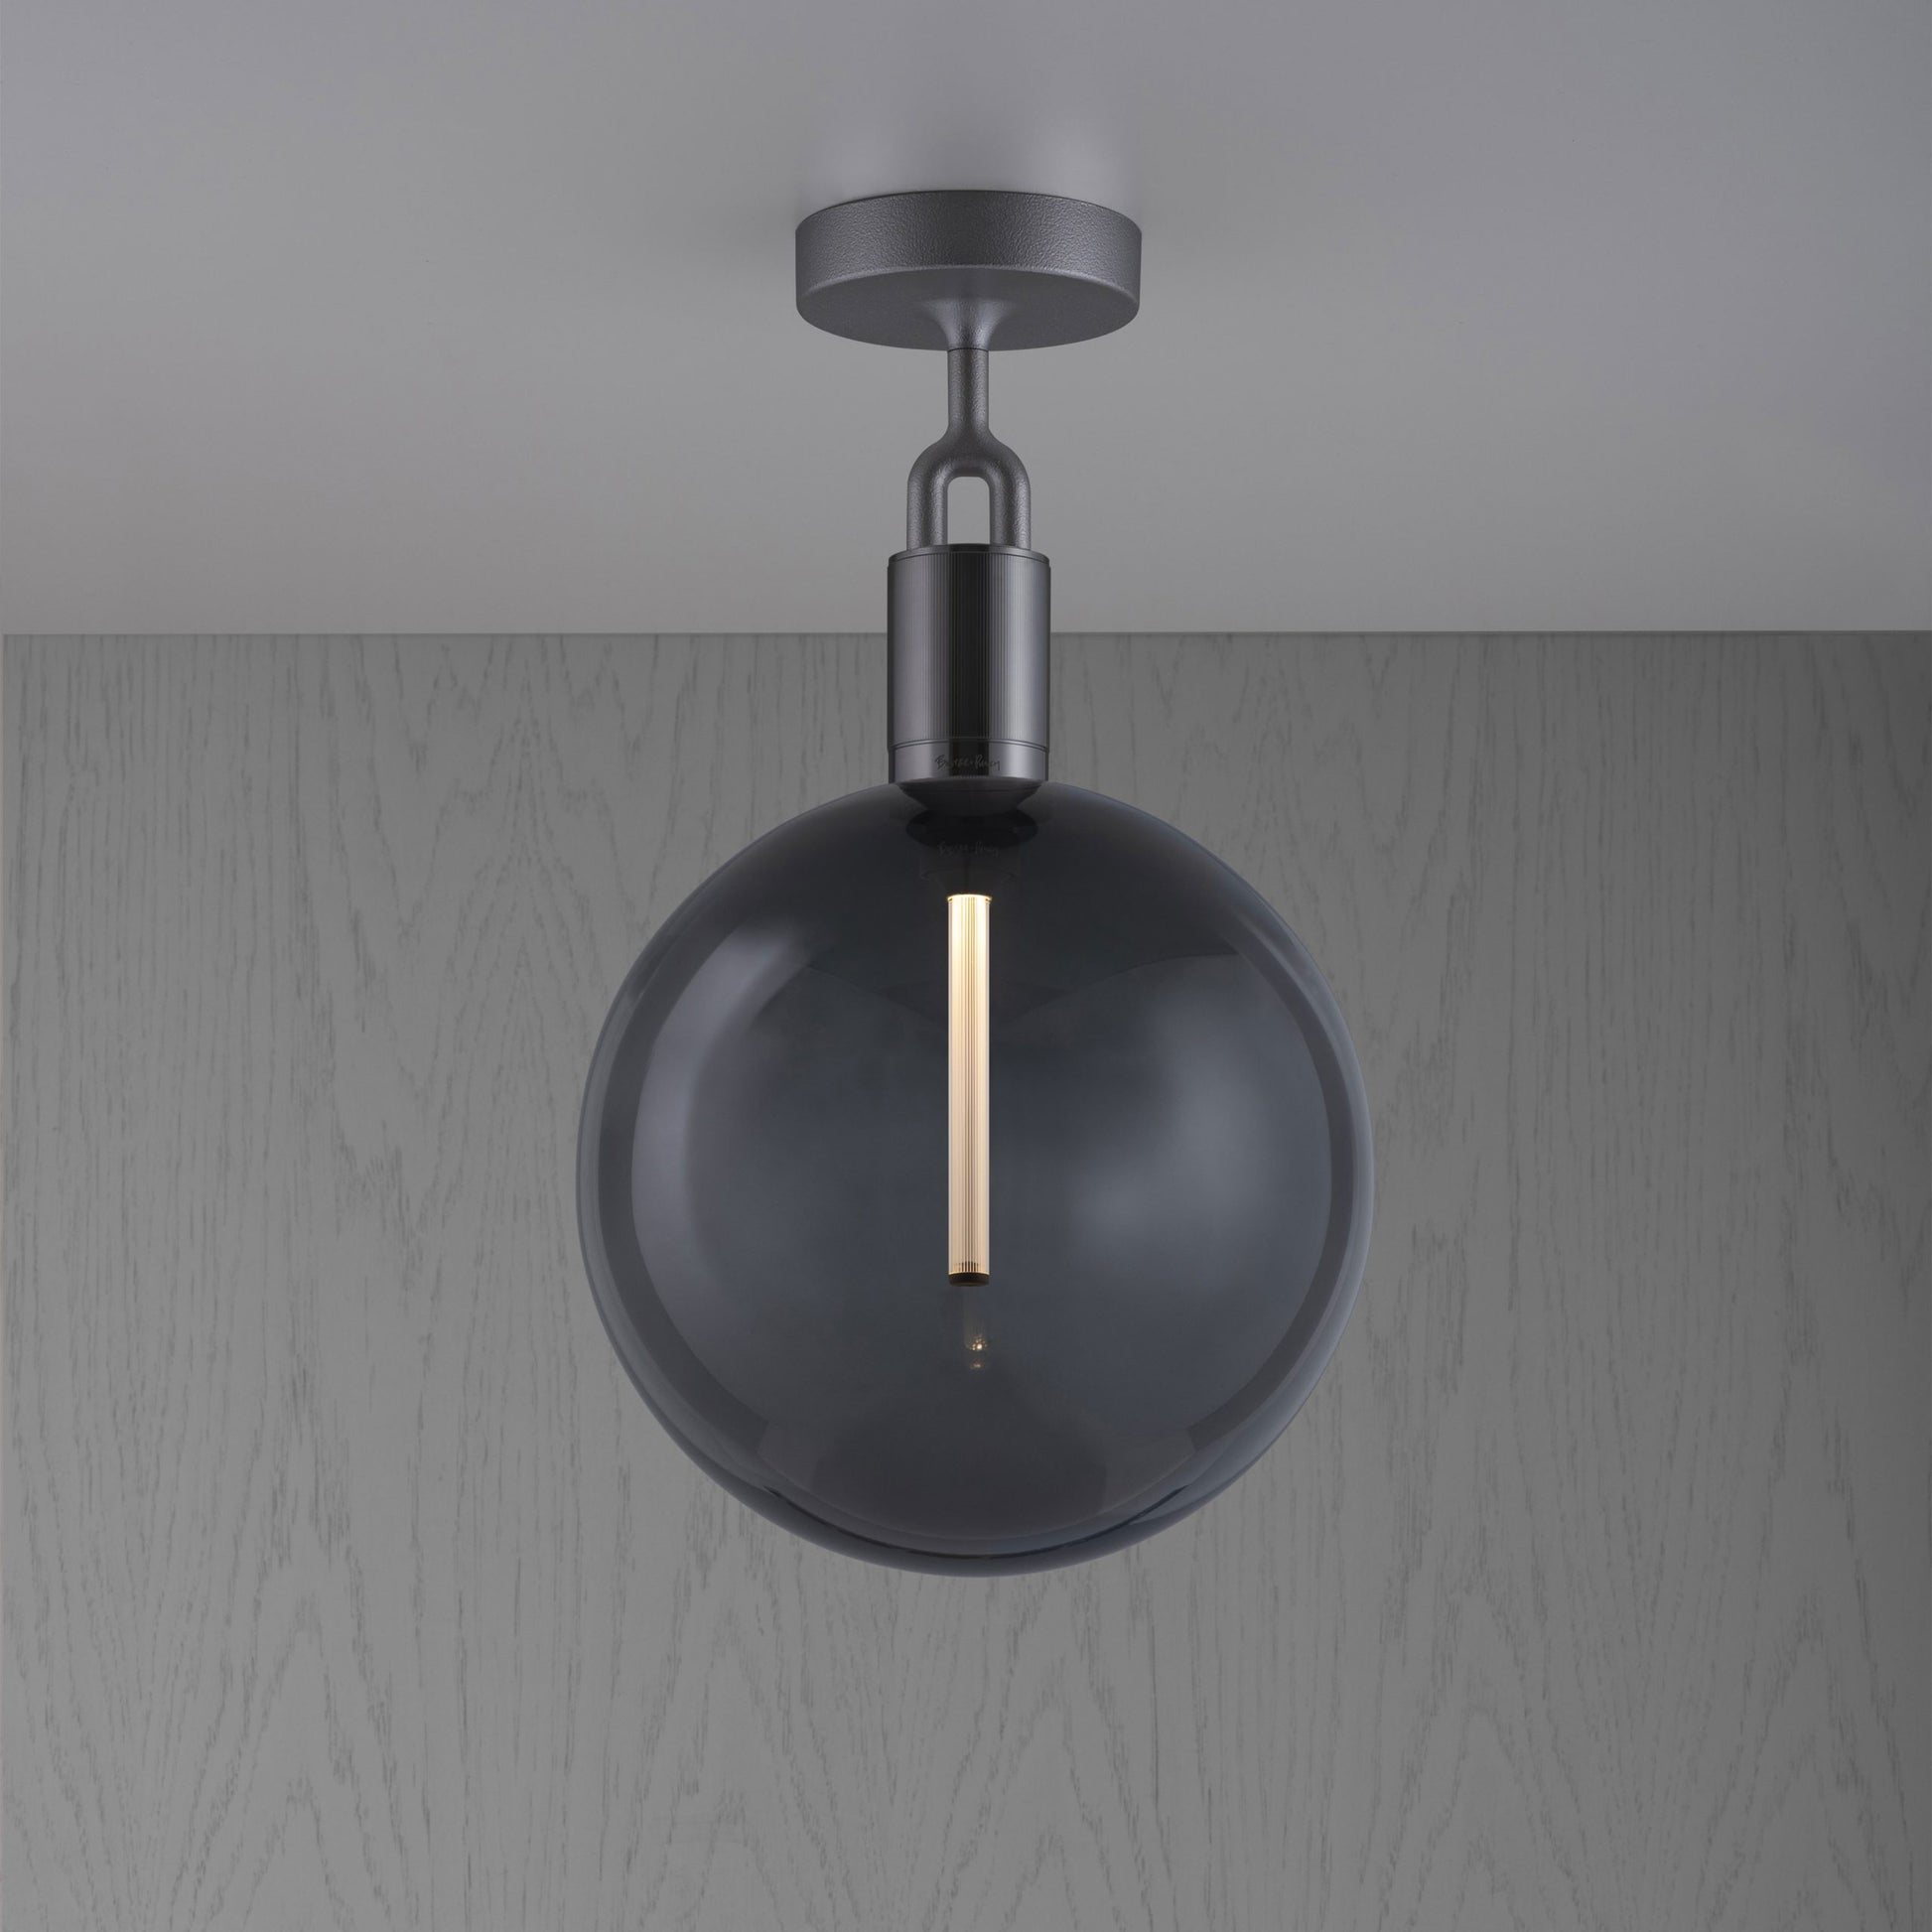 Forked Ceiling Light / Globe / Smoked / Large Gun metal, front view.